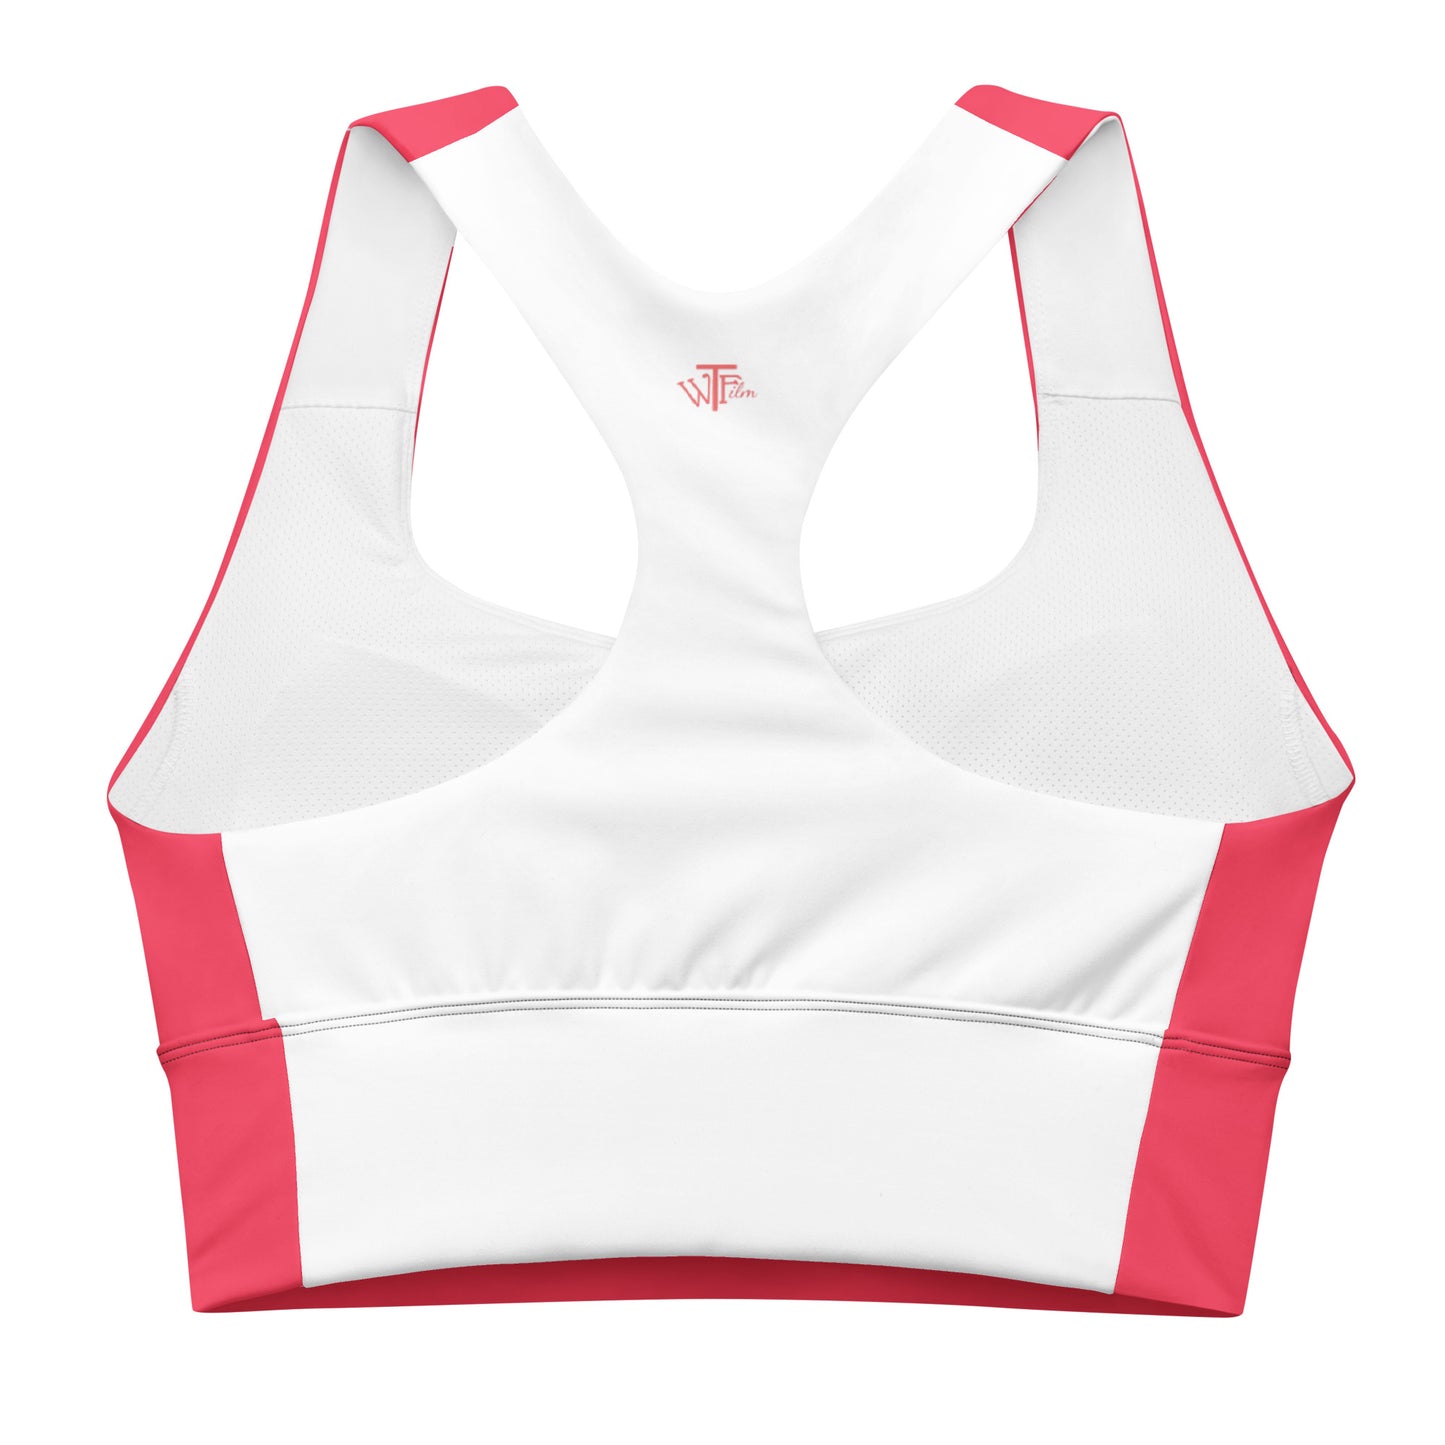 'Do This All Day' Longline sports bra